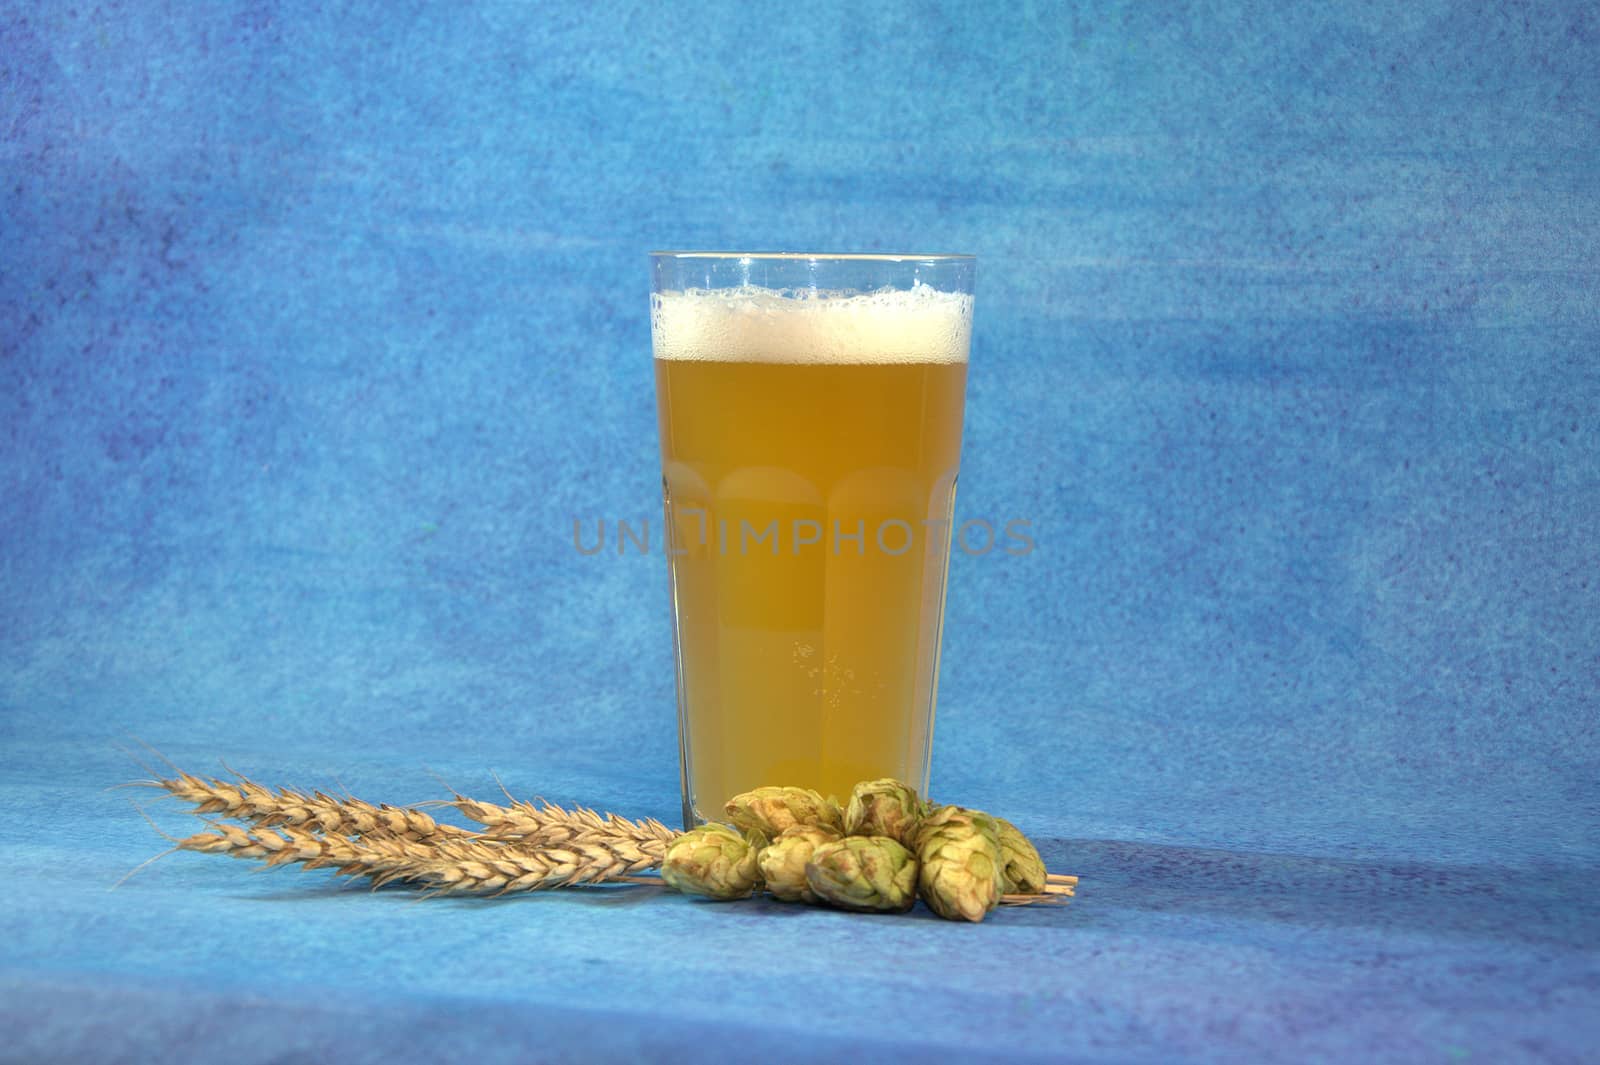 A full glass of light beer with foam, next to ears of wheat and hops. Blue background. Close-up.